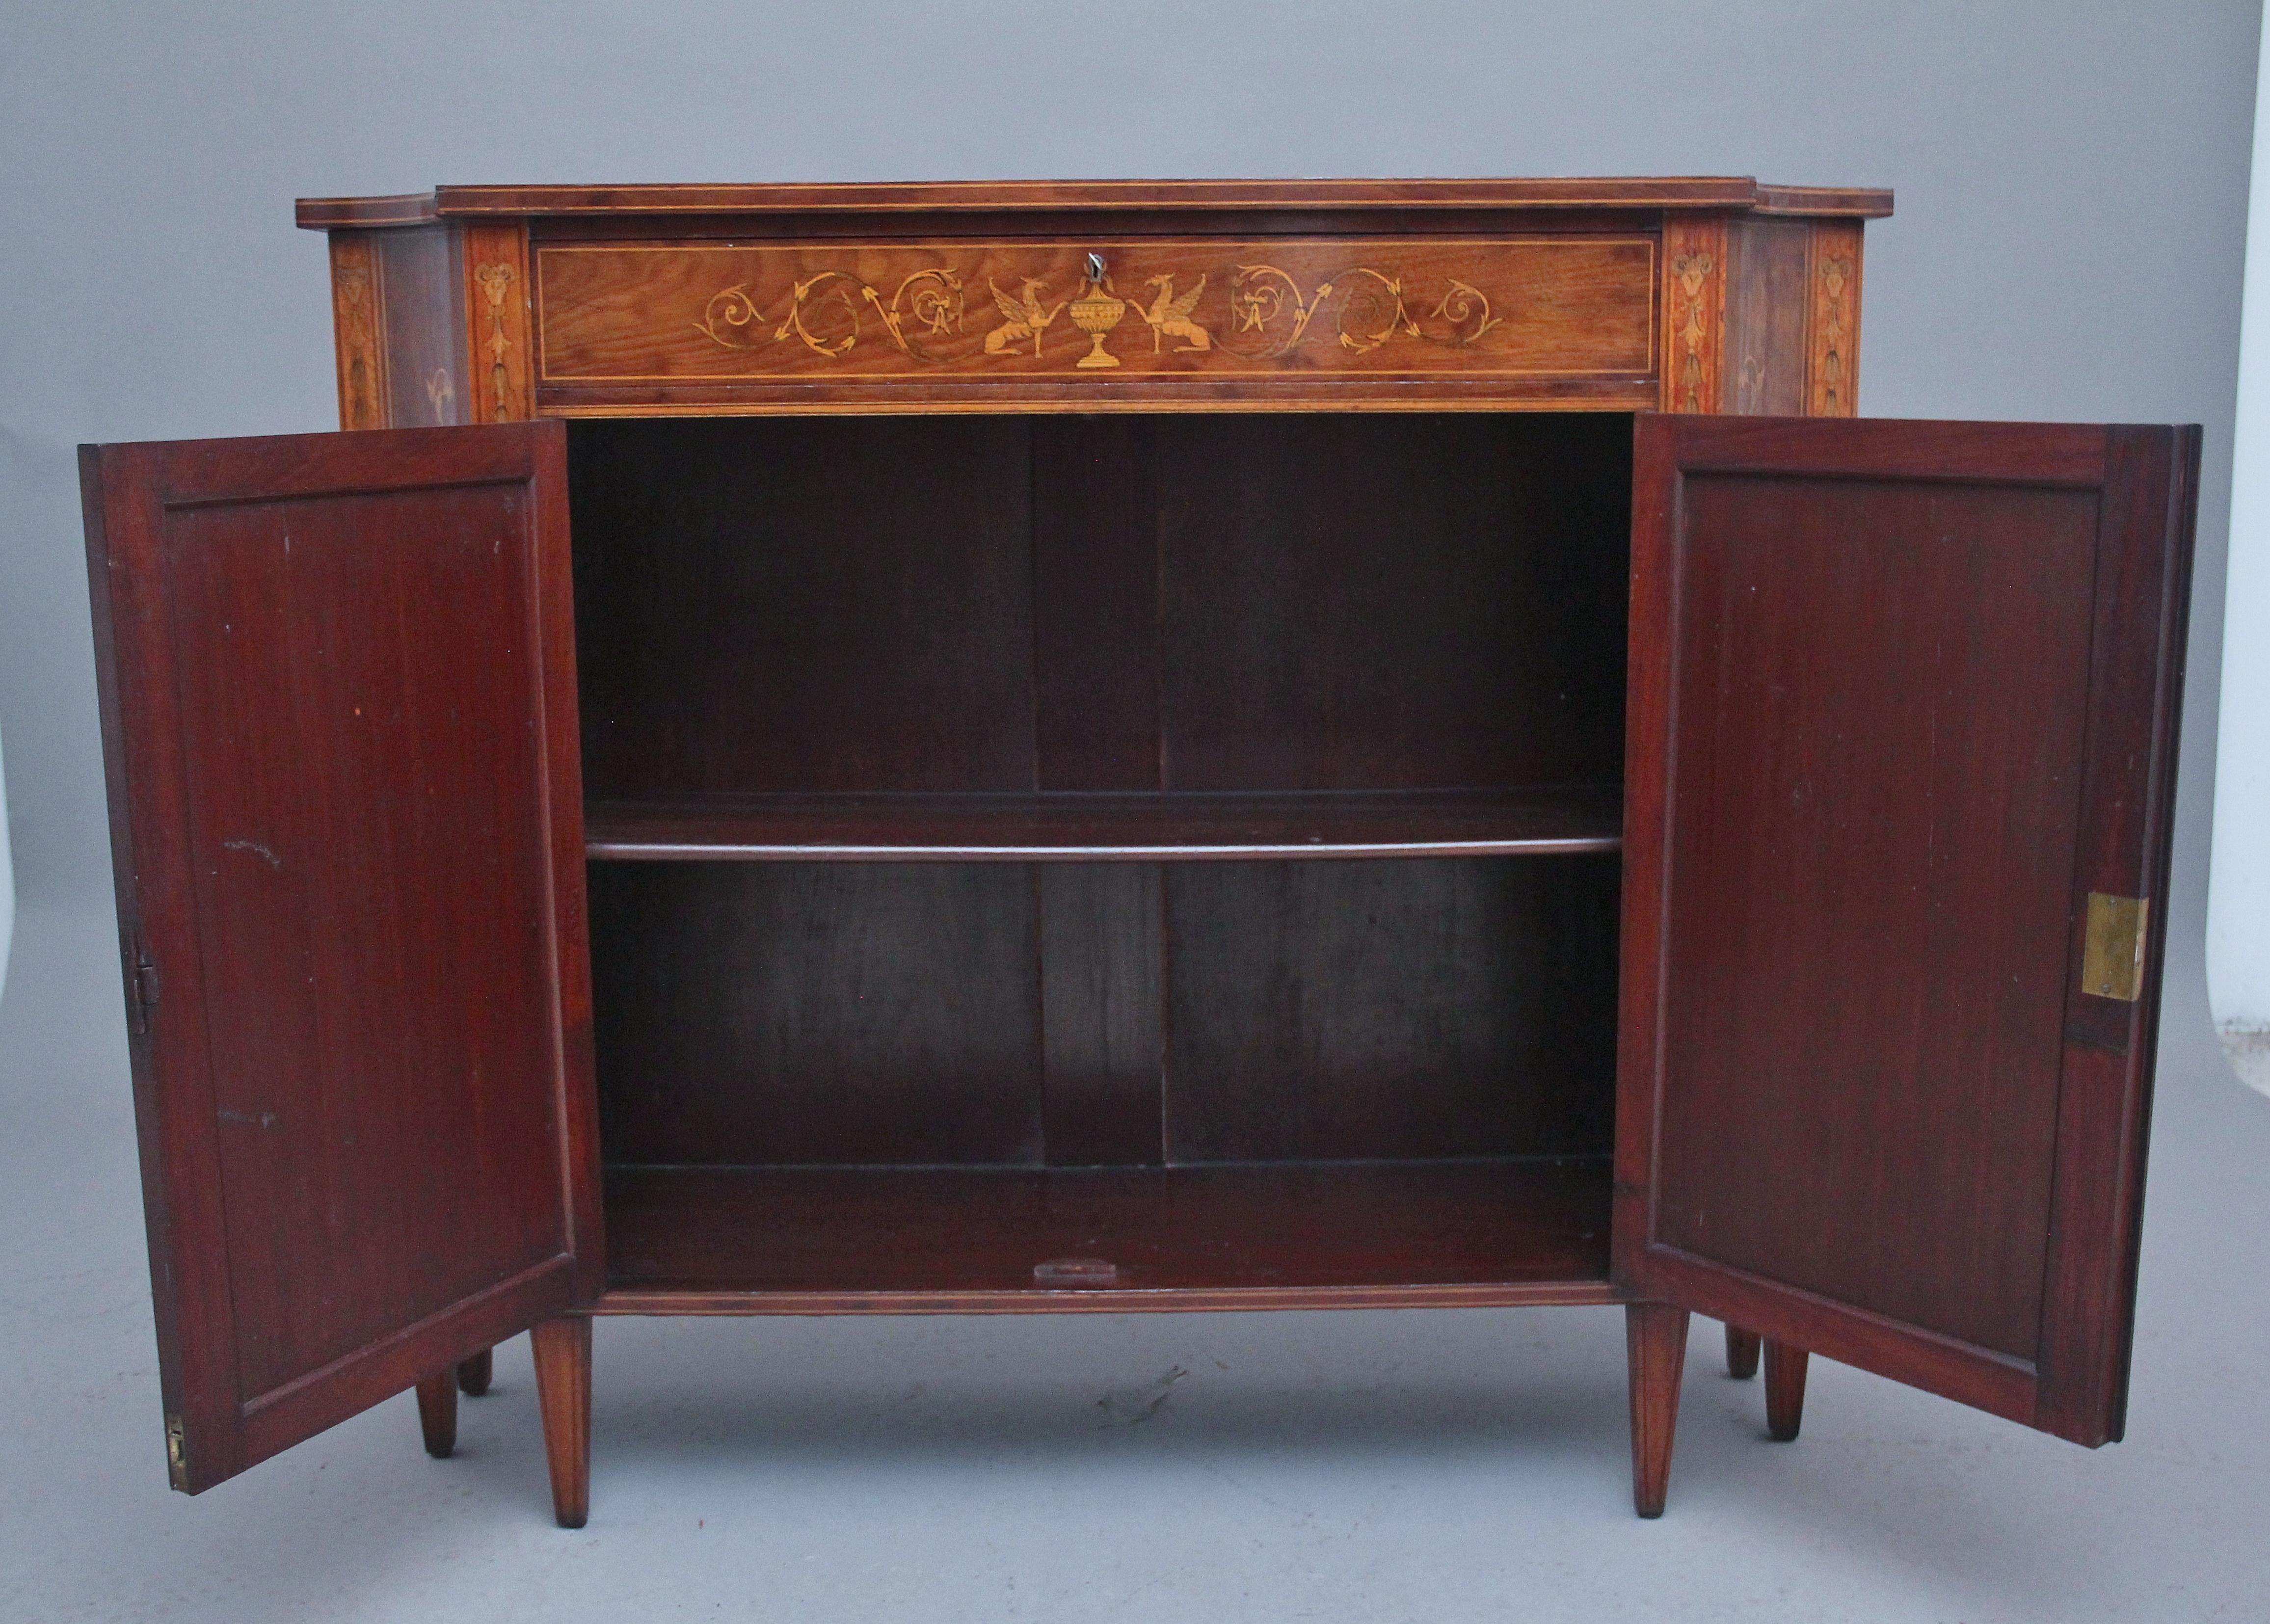 A highly decorative 19th Century mahogany and inlaid side cabinet in the Sheraton style, having a nice figured shaped top with decorative inlay incorporating various masks, musical instruments and foliage, single mahogany lined frieze drawer below